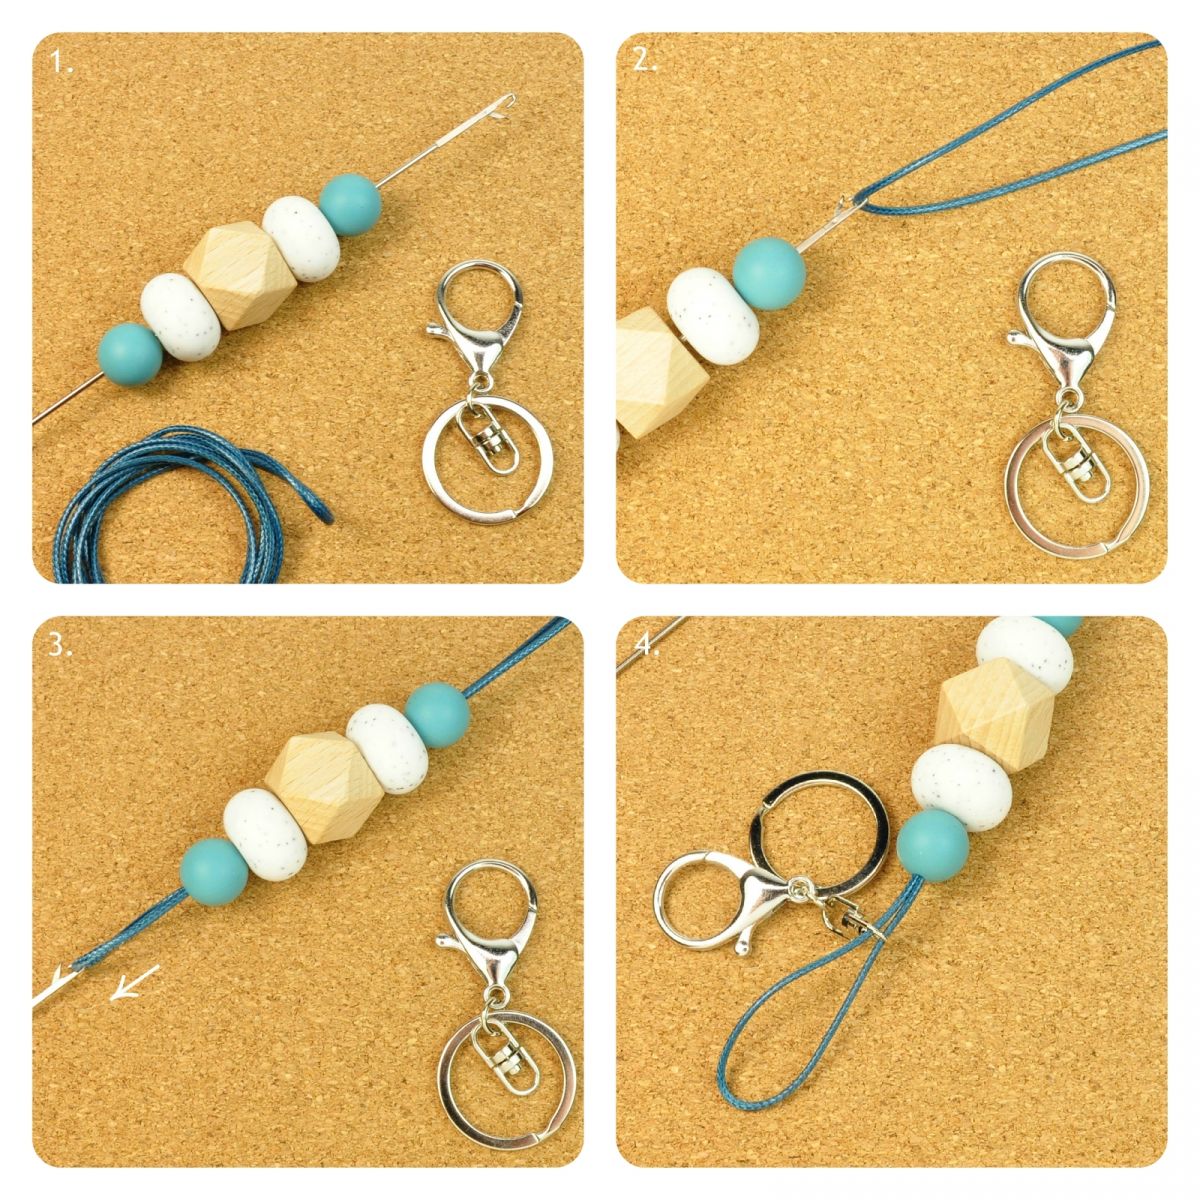 DIY Hints and Tips Double Threading Cord Through Beads